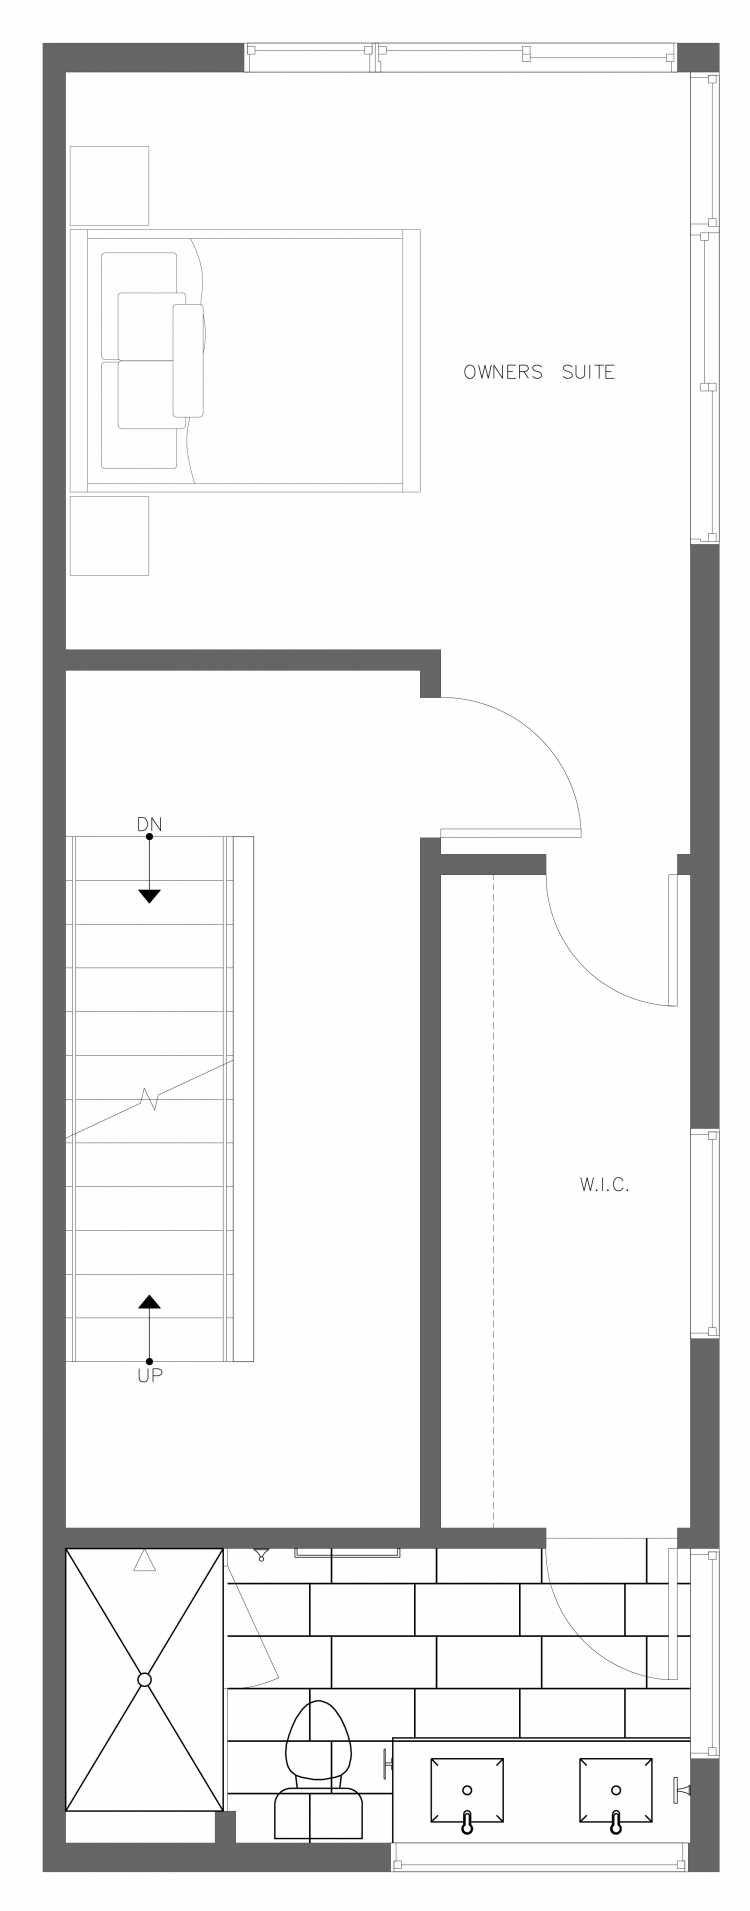 Third Floor Plan of 3406D 15th Ave W, One of the Arlo Townhomes in North Queen Anne